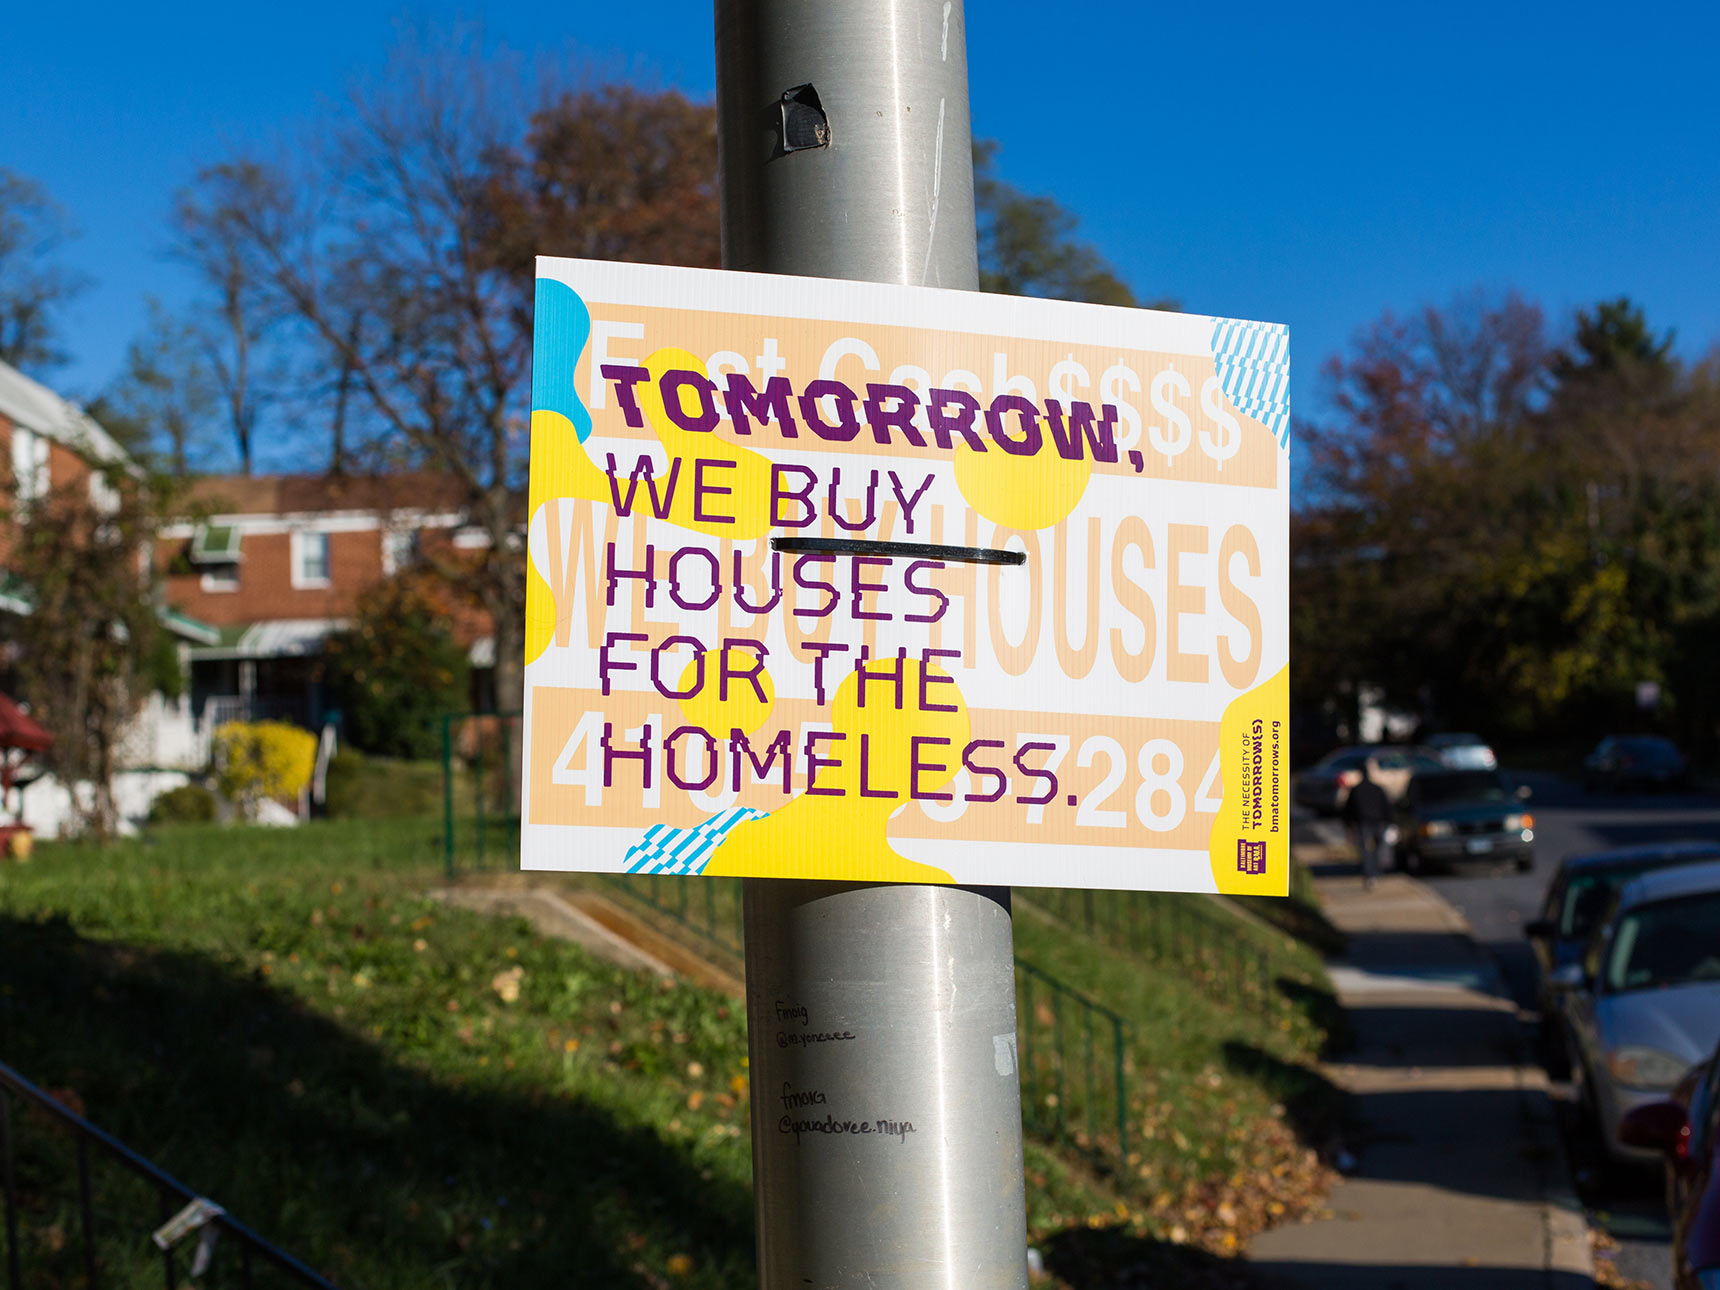 Tomorrow, we buy houses for the homeless. A detournement interrupted bandit sign public art piece